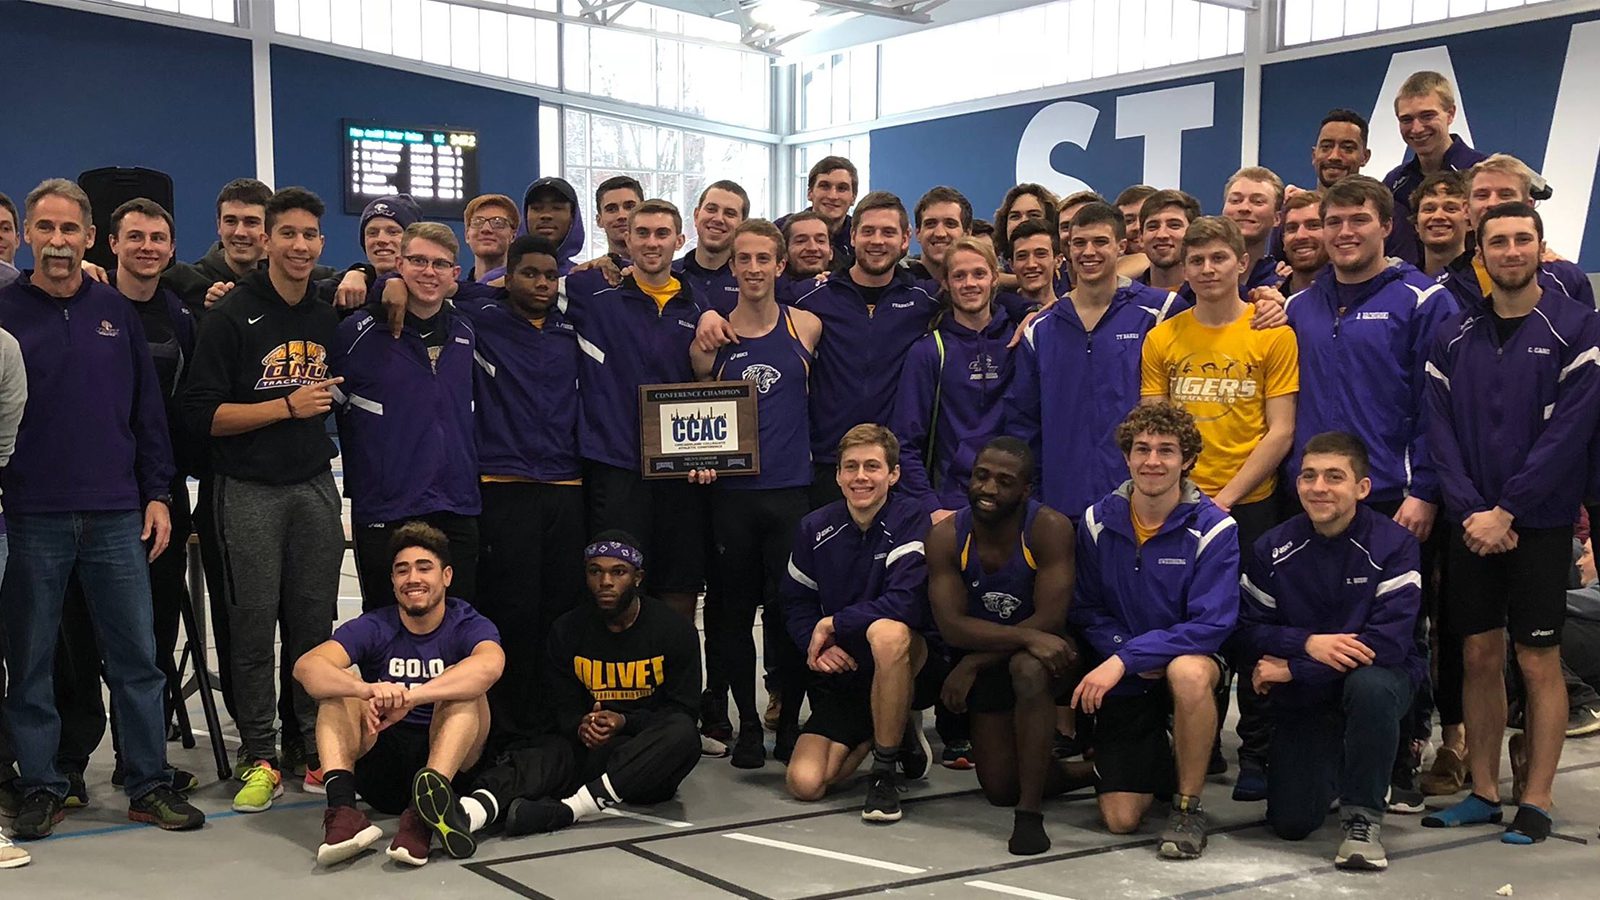 2018 men's indoor track and field conference championship_Feb18_Web.jpg